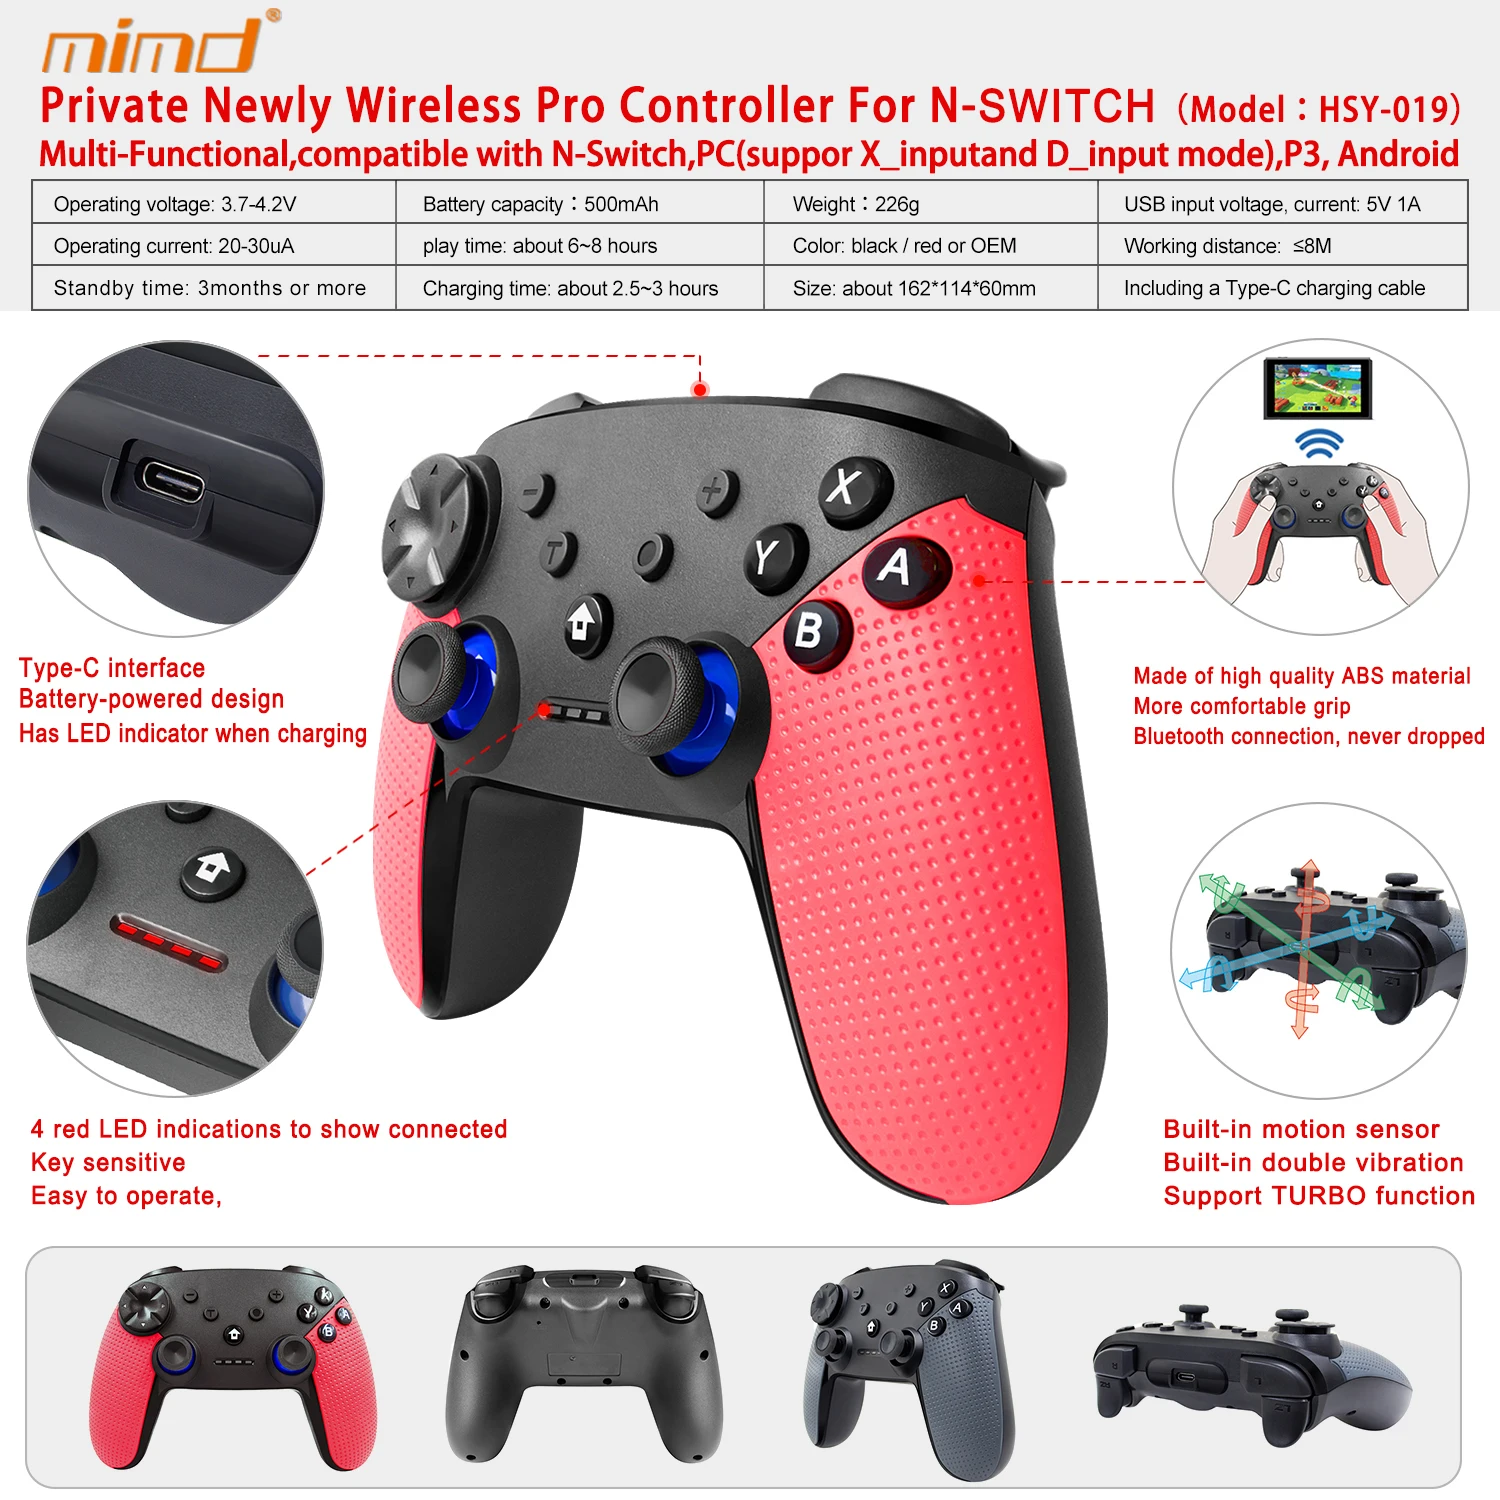 Hot New Bluetooth Wireless Gamepad Controller Compatible With Nintendo Switch P3 Windows Pc And Android Buy Bluetooth Wireless Gamepad For Nintendo Switch Bluetooth Wireless Gamepad Controller Compatible With Nintendo Switch Wireless Controller For